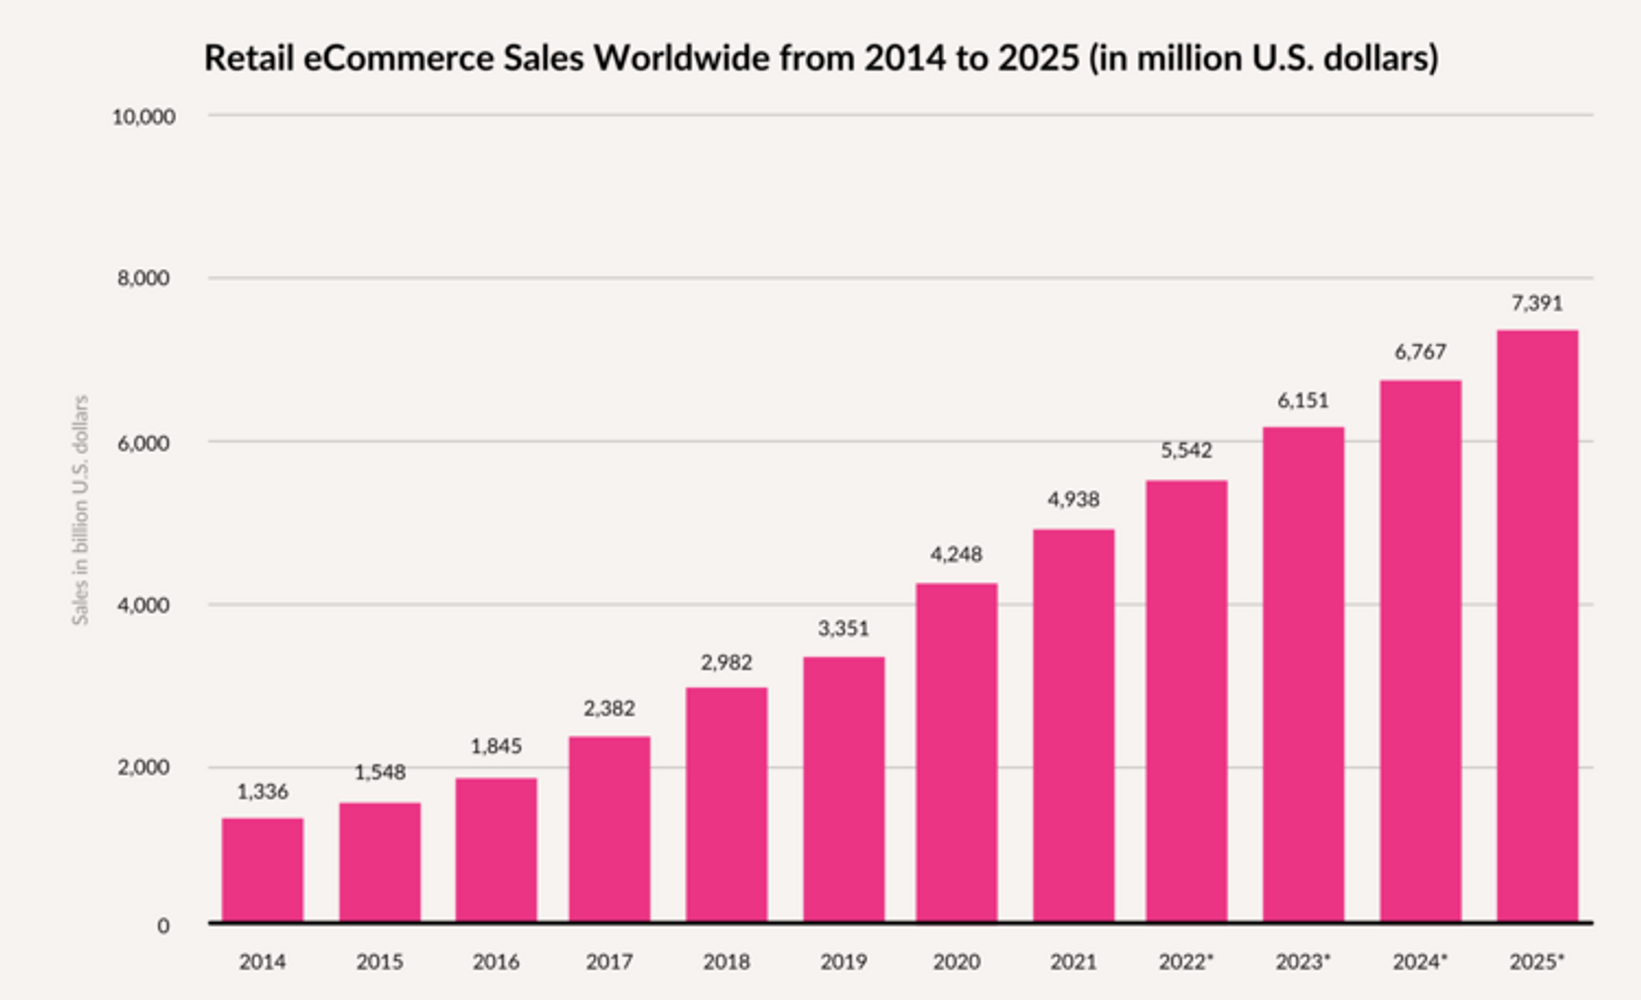 Retail eCommerce Sales Worldwide from 2014-2025